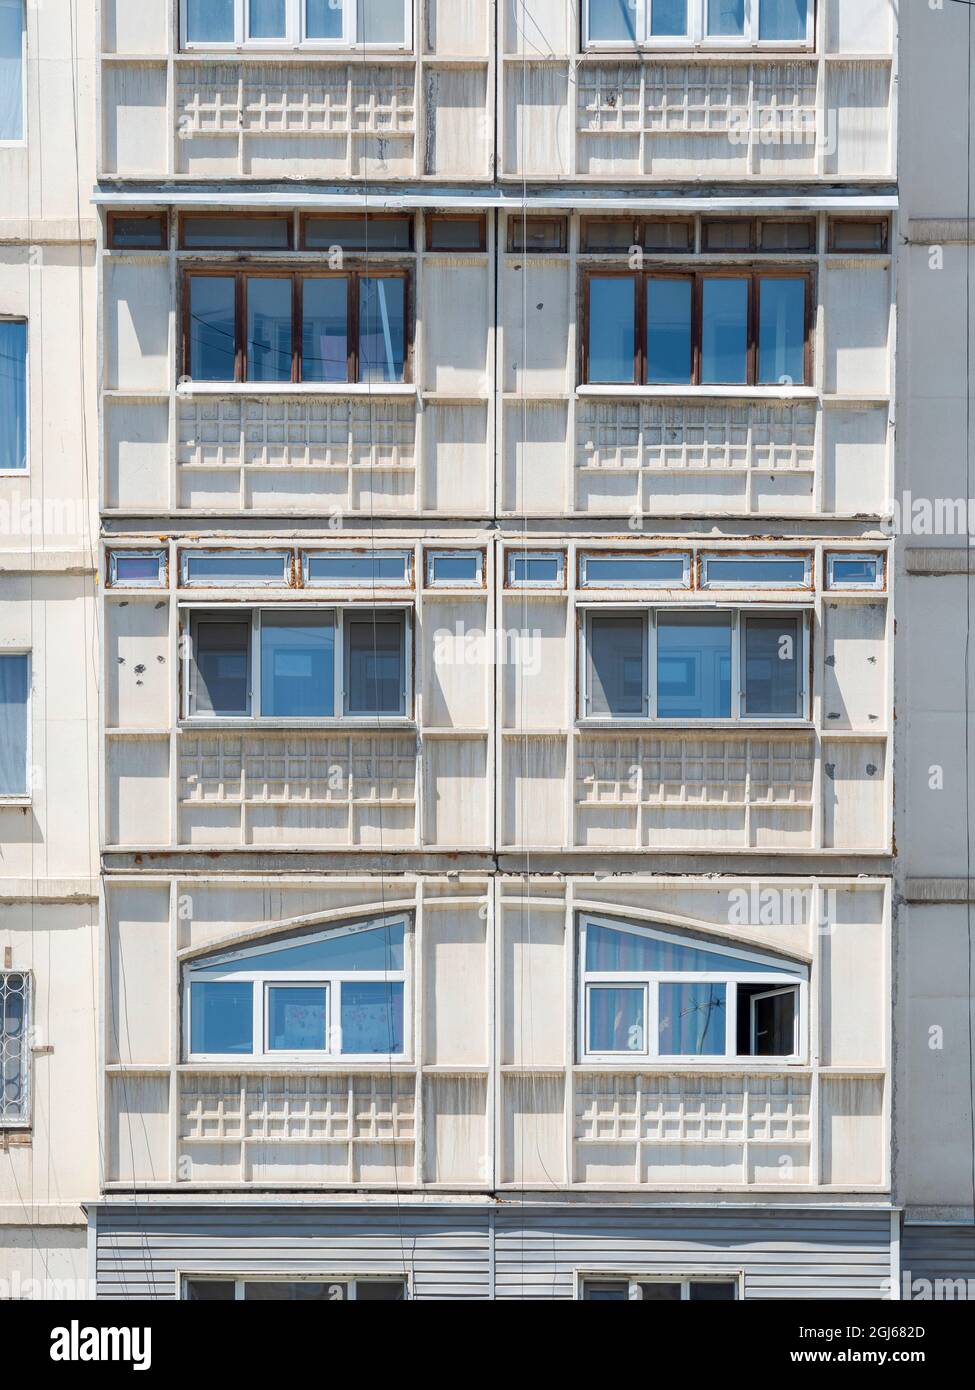 Typical living quarter built during the Soviet Union (Rayon). The capital Bishkek, Kyrgyzstan. (Editorial Use Only) Stock Photo